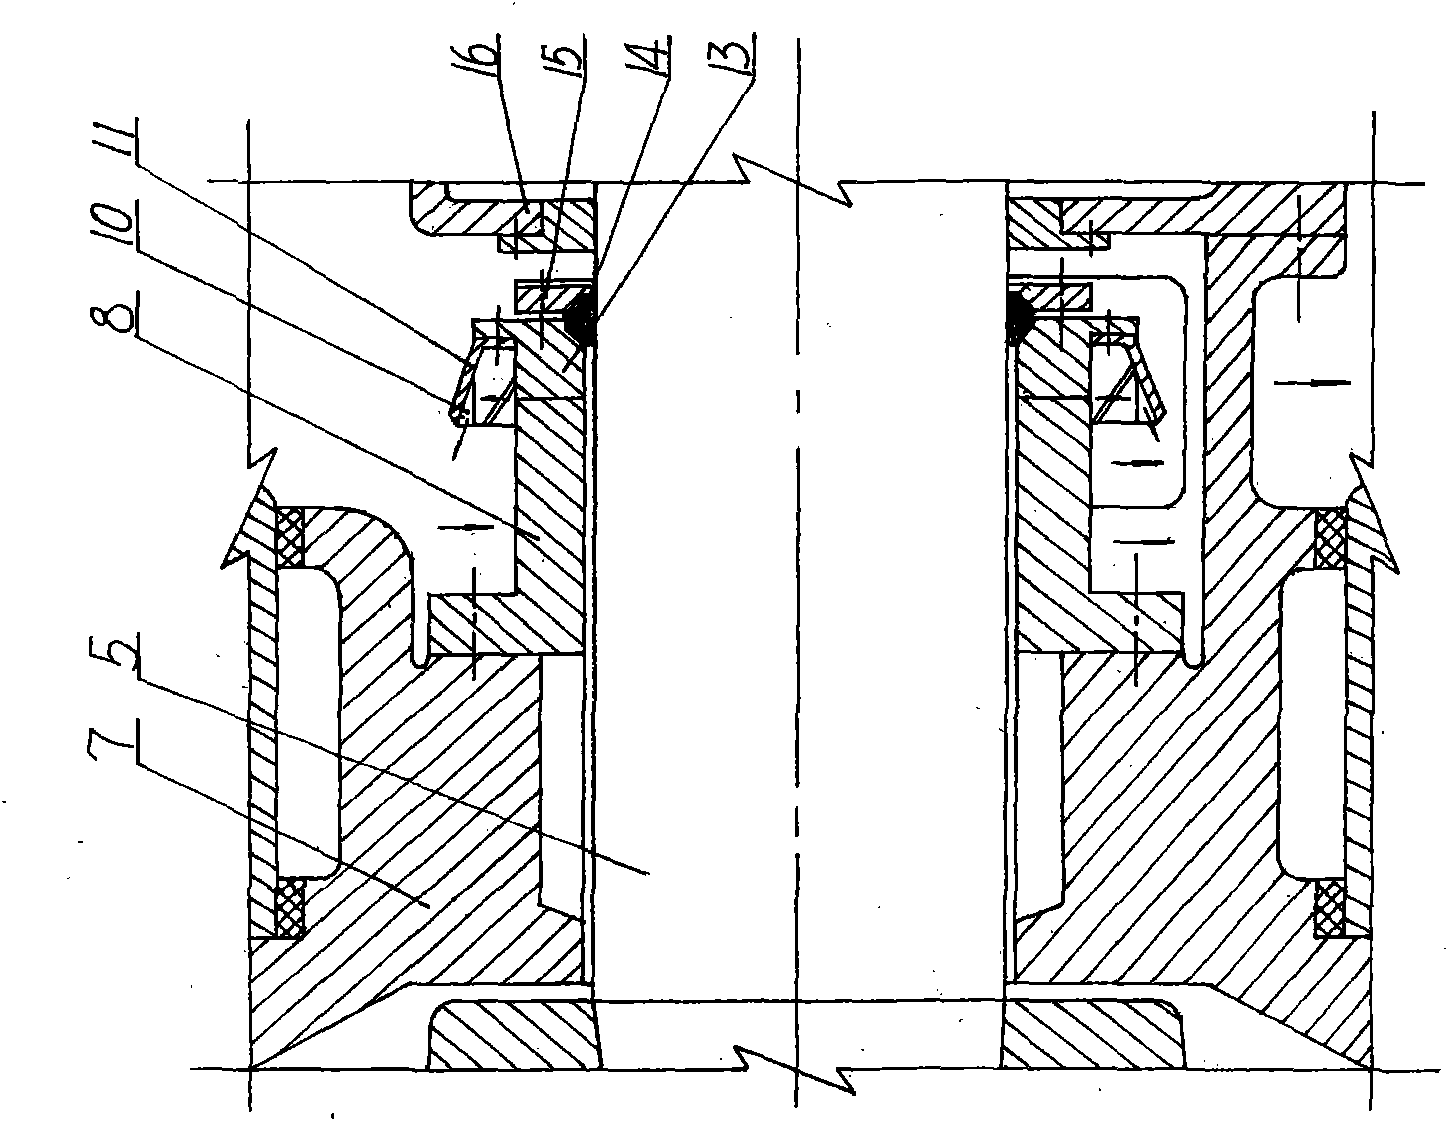 Adjustable gap seal and leakage treatment device